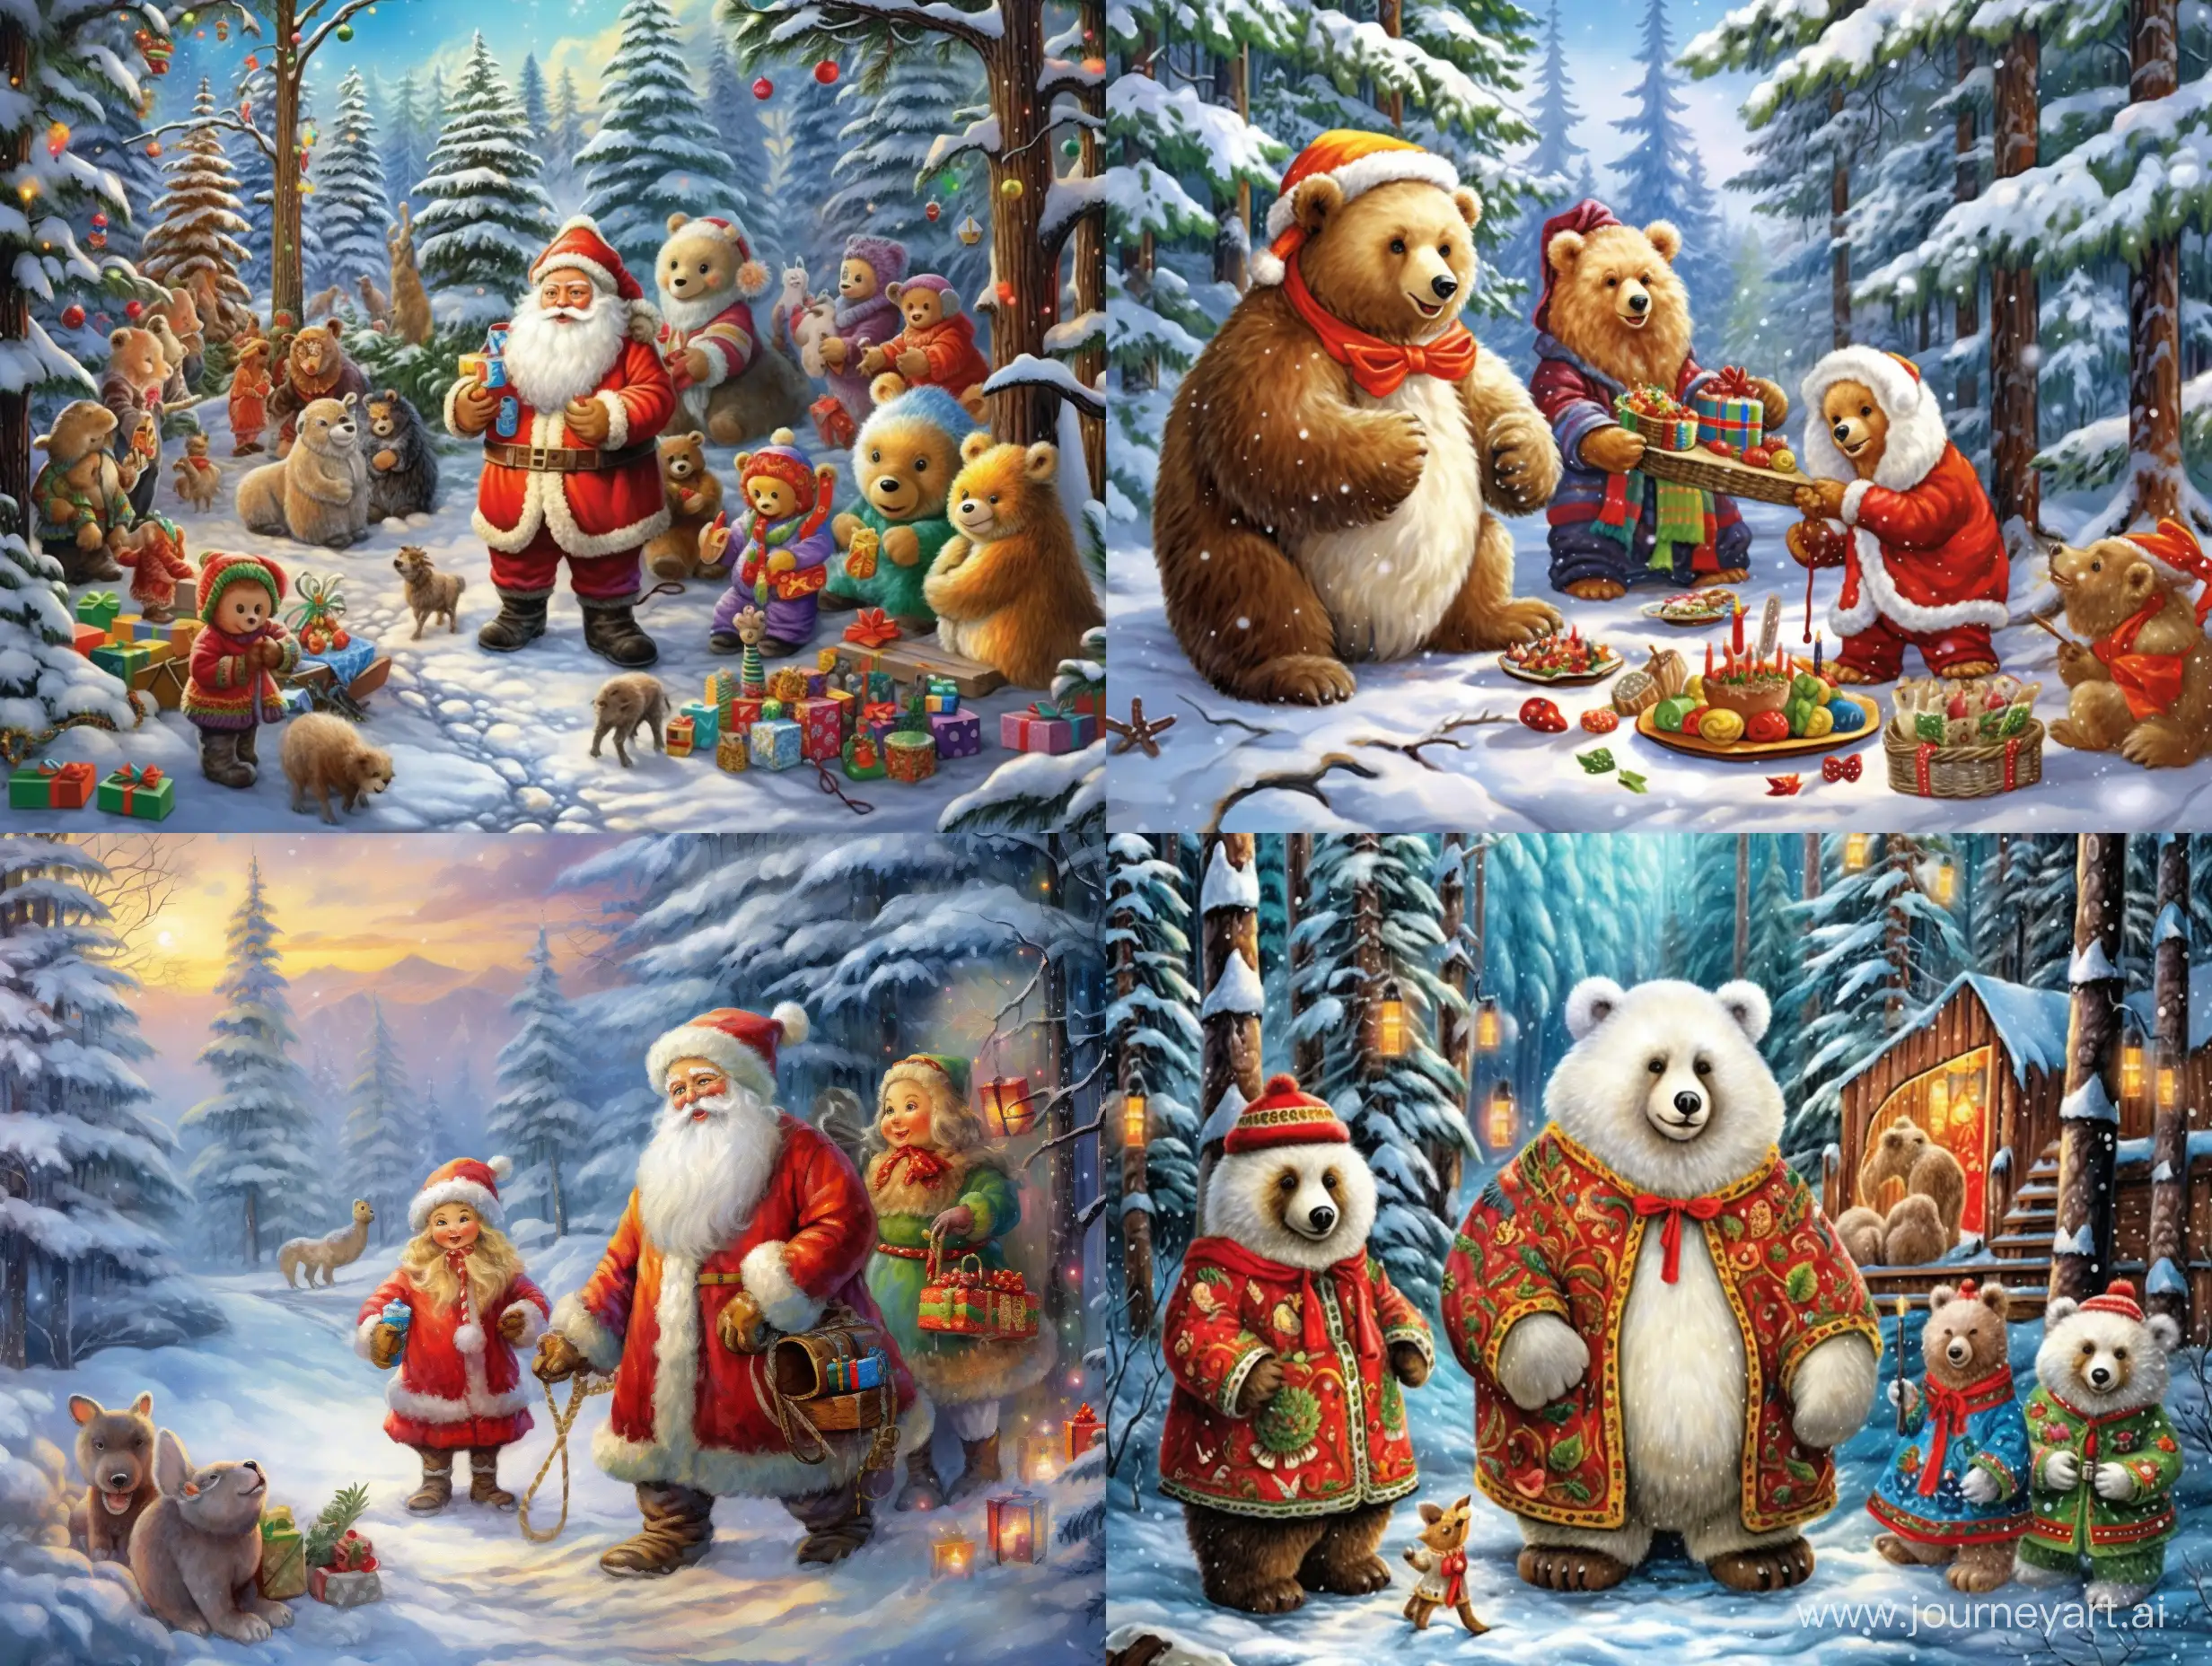 Russian-Ded-Moroz-Celebration-with-Children-in-Snowy-Forest